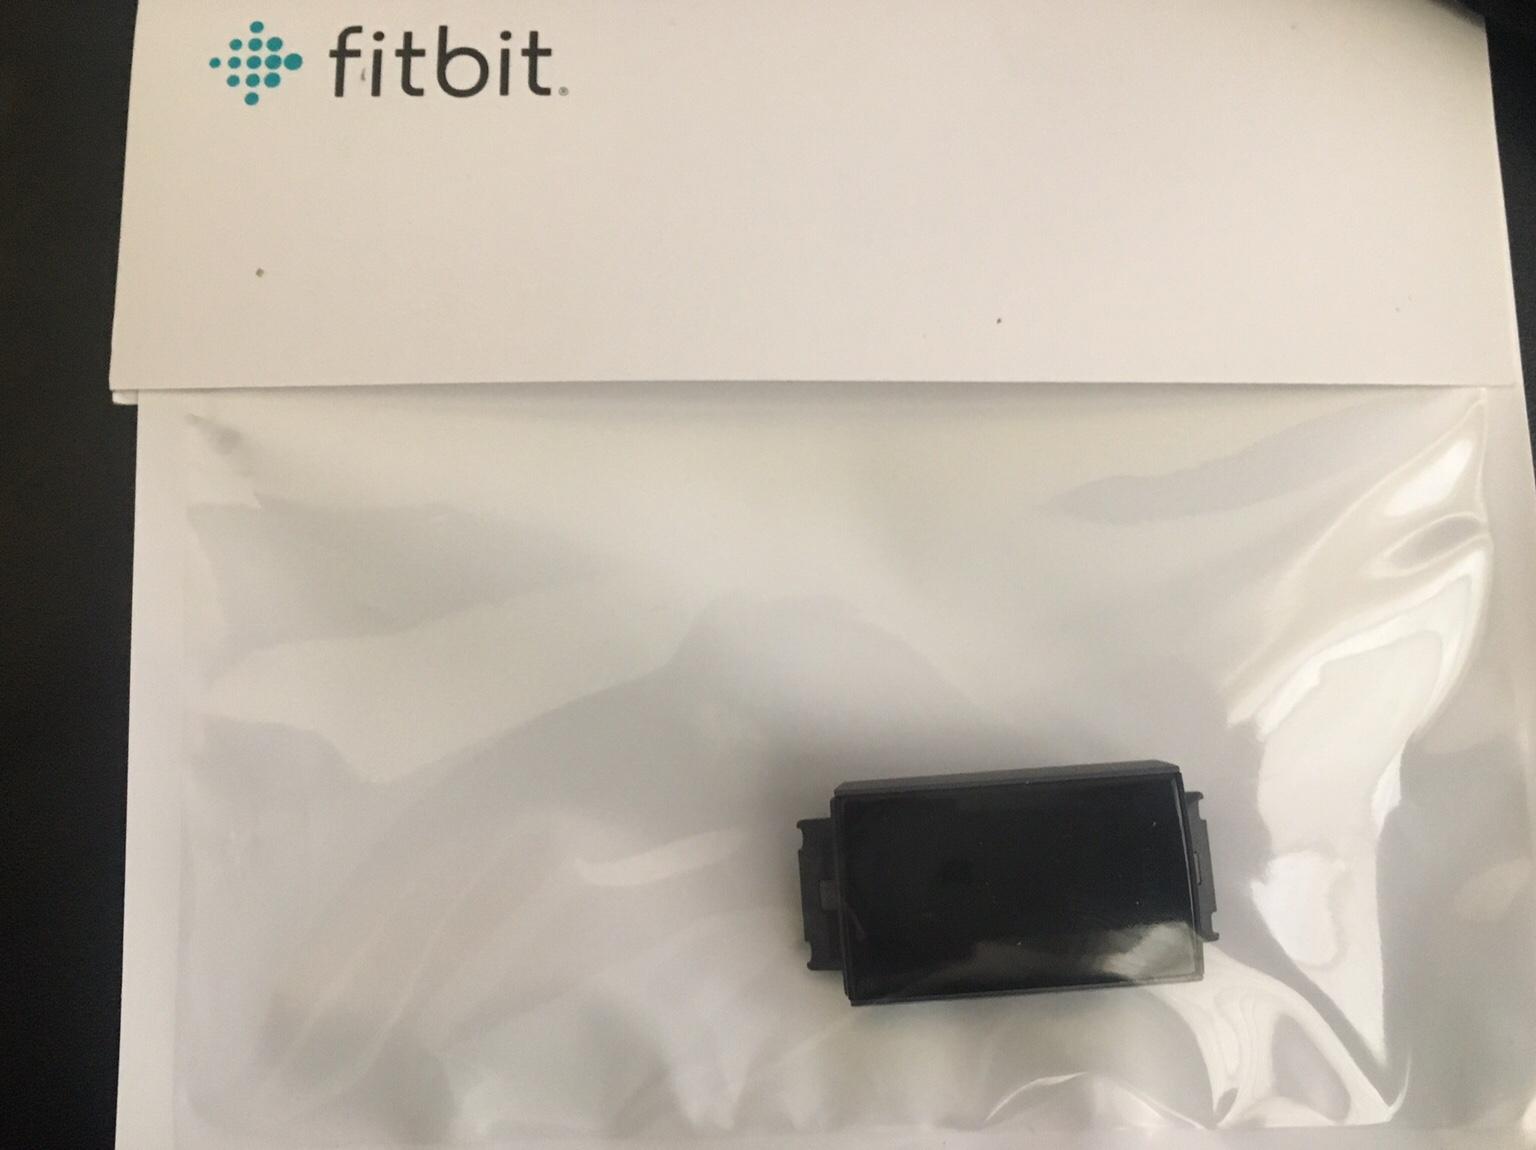 what is a fitbit charge 3 pebble